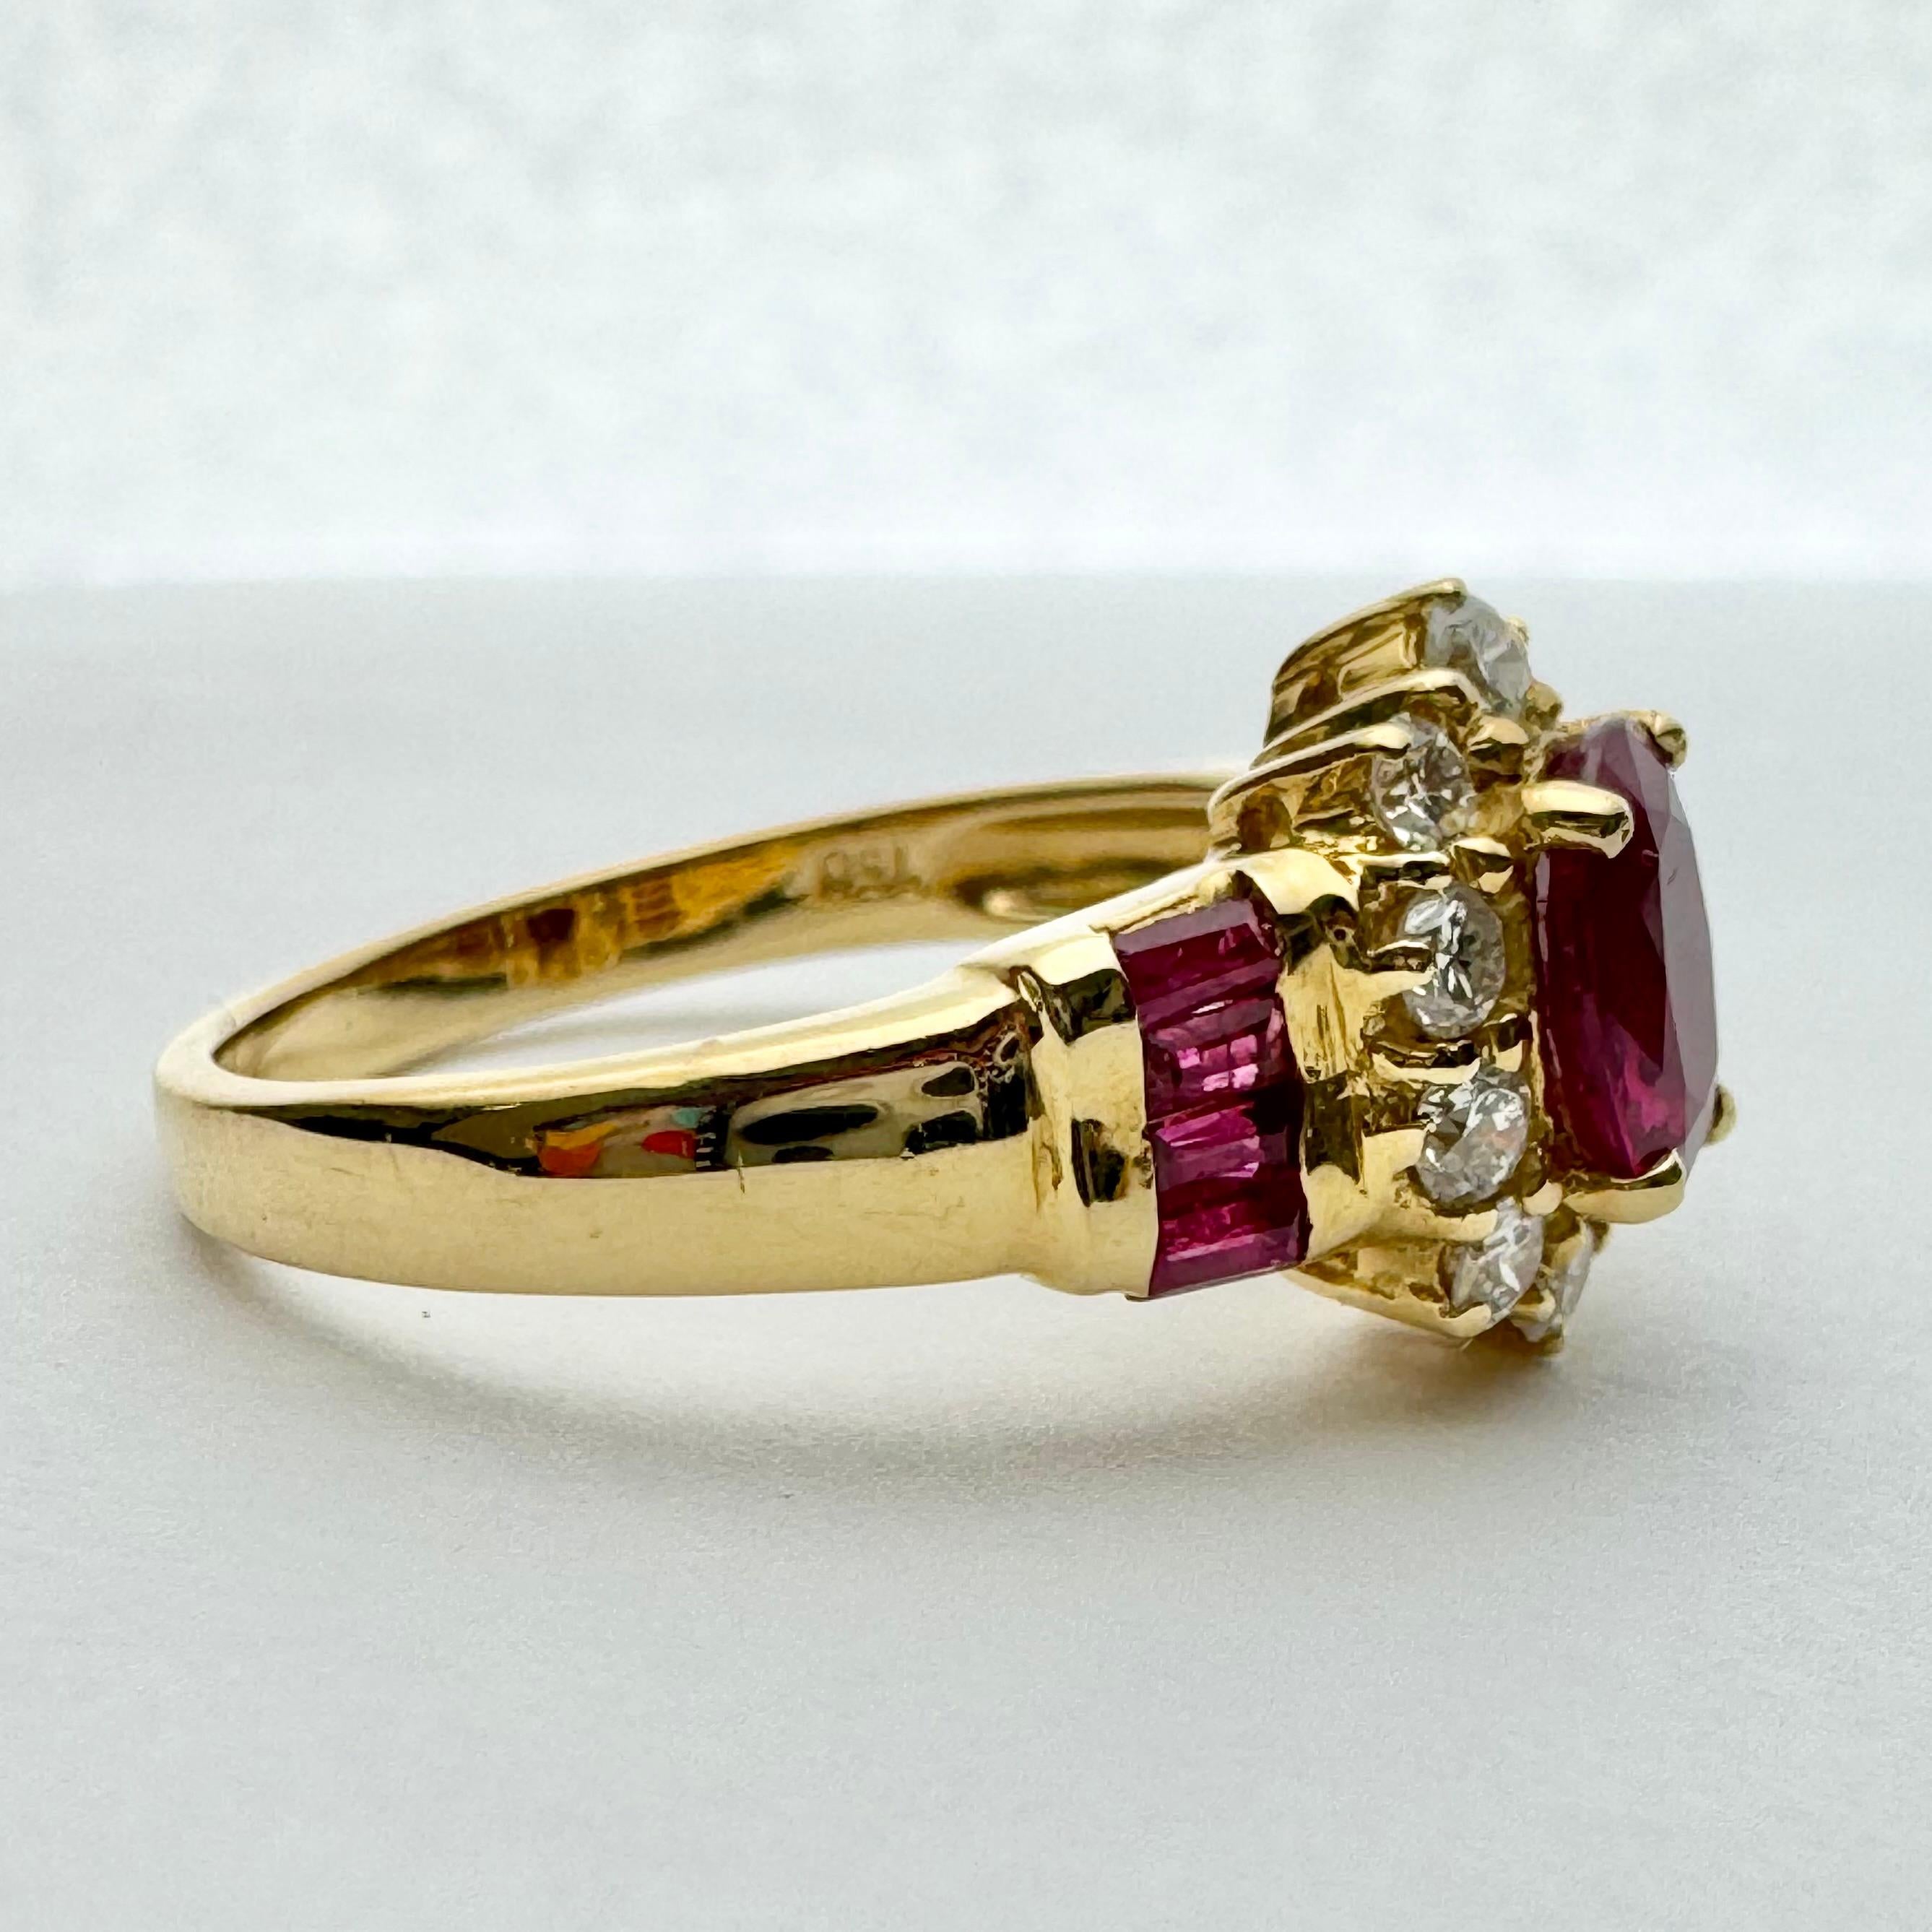 Beautiful vintage ruby and diamond ring in 18k yellow gold.
Rich red ruby, surrounded by dazzling halo of white round brilliant diamonds and addition accent stones of tapered baguette rubies along the sides. Center oval ruby is approximately 1 carat